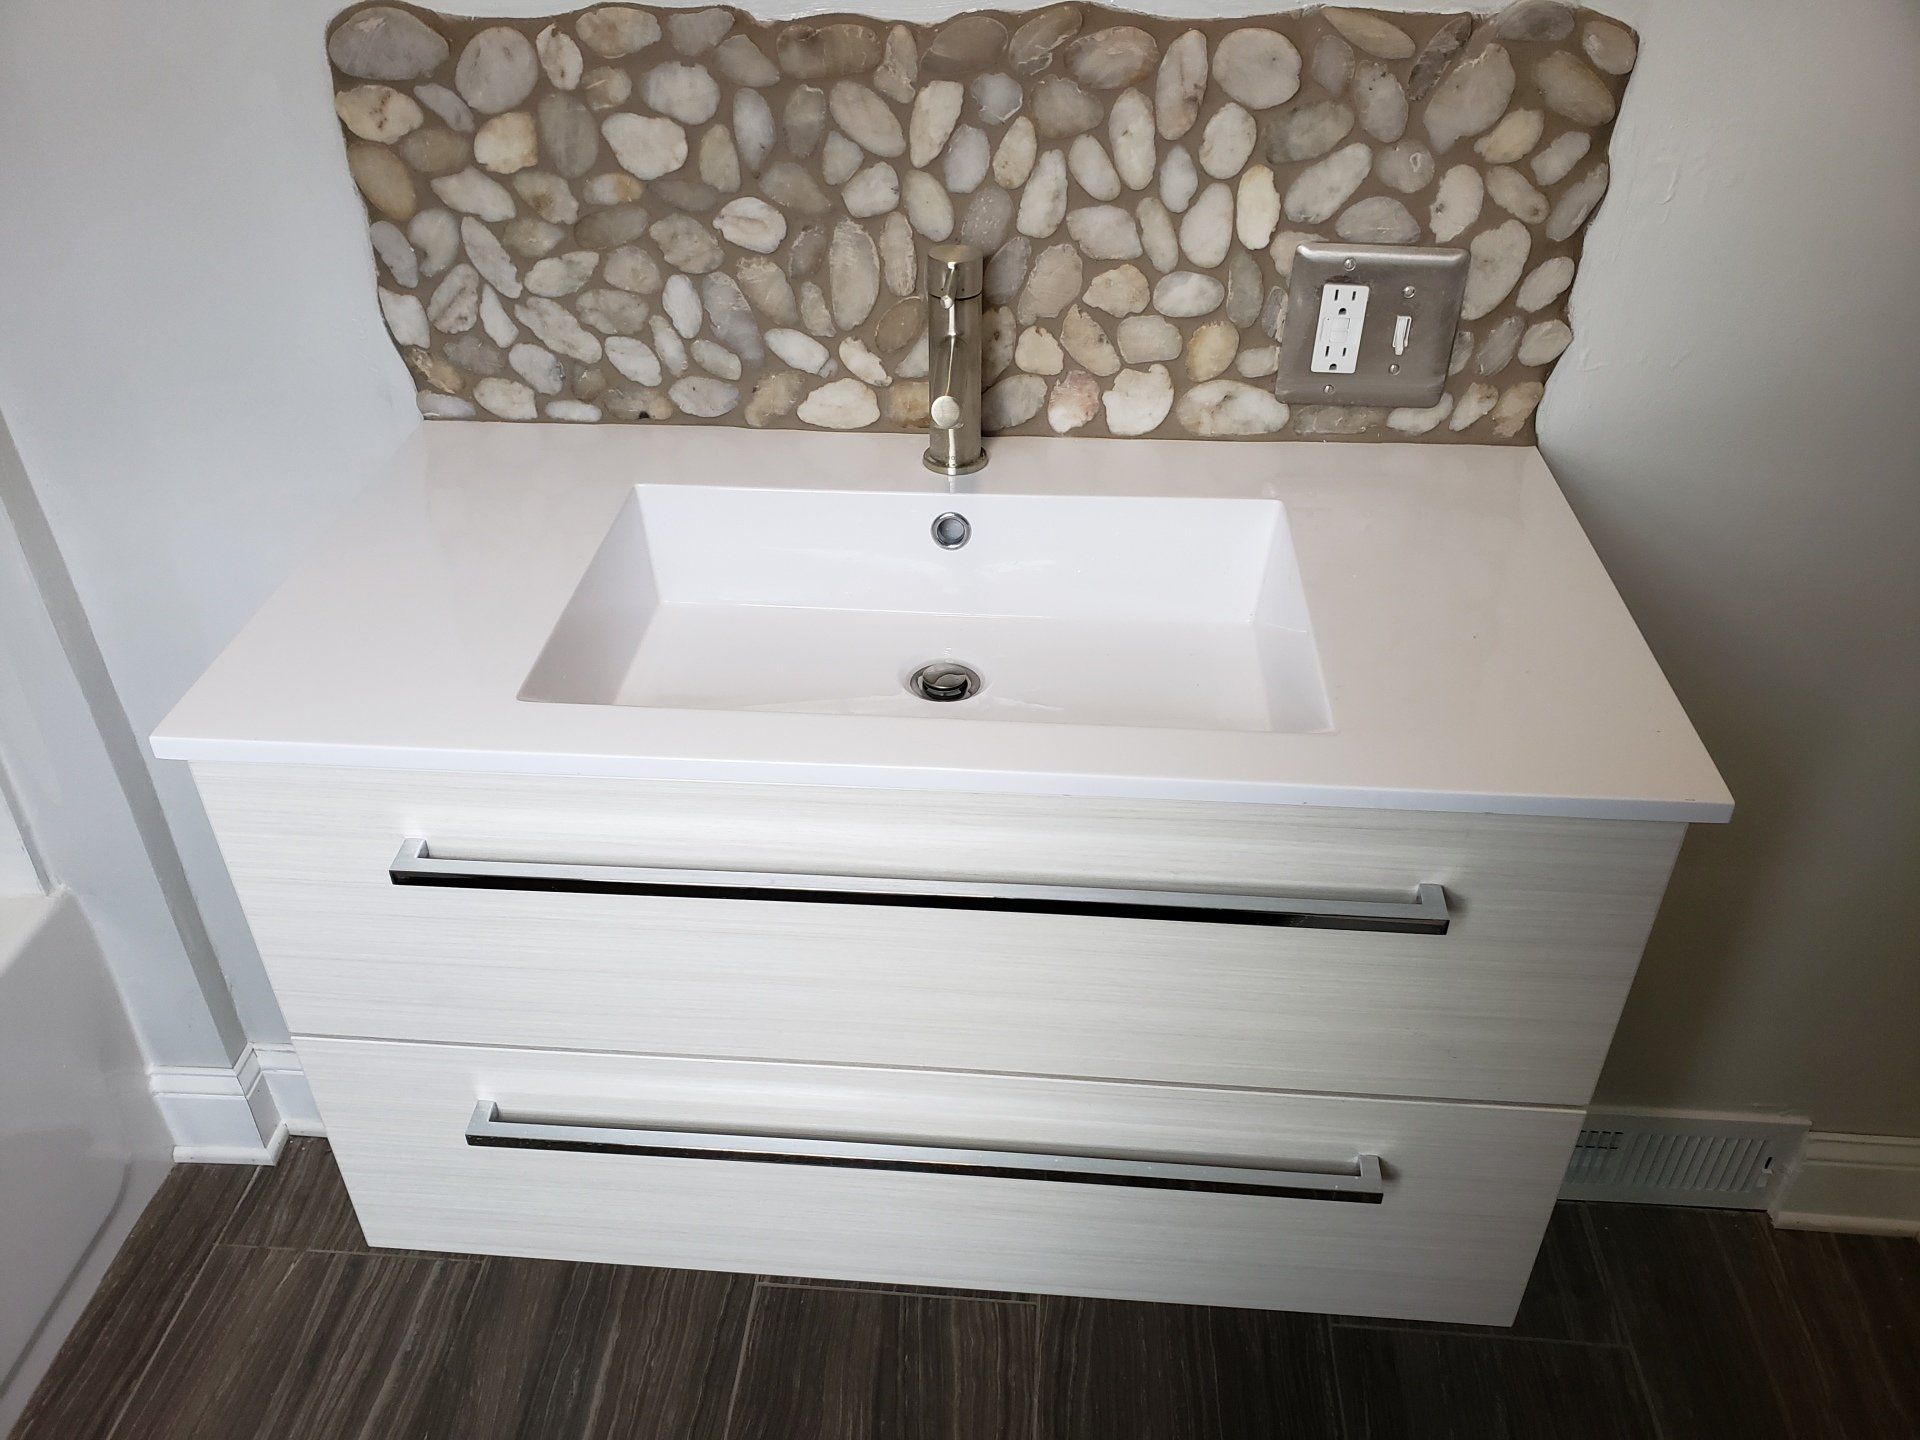 Front view close up of modern style floating vanity and sink with custom designed and installed pebble backsplash in Willow Grove master bathroom remodel.